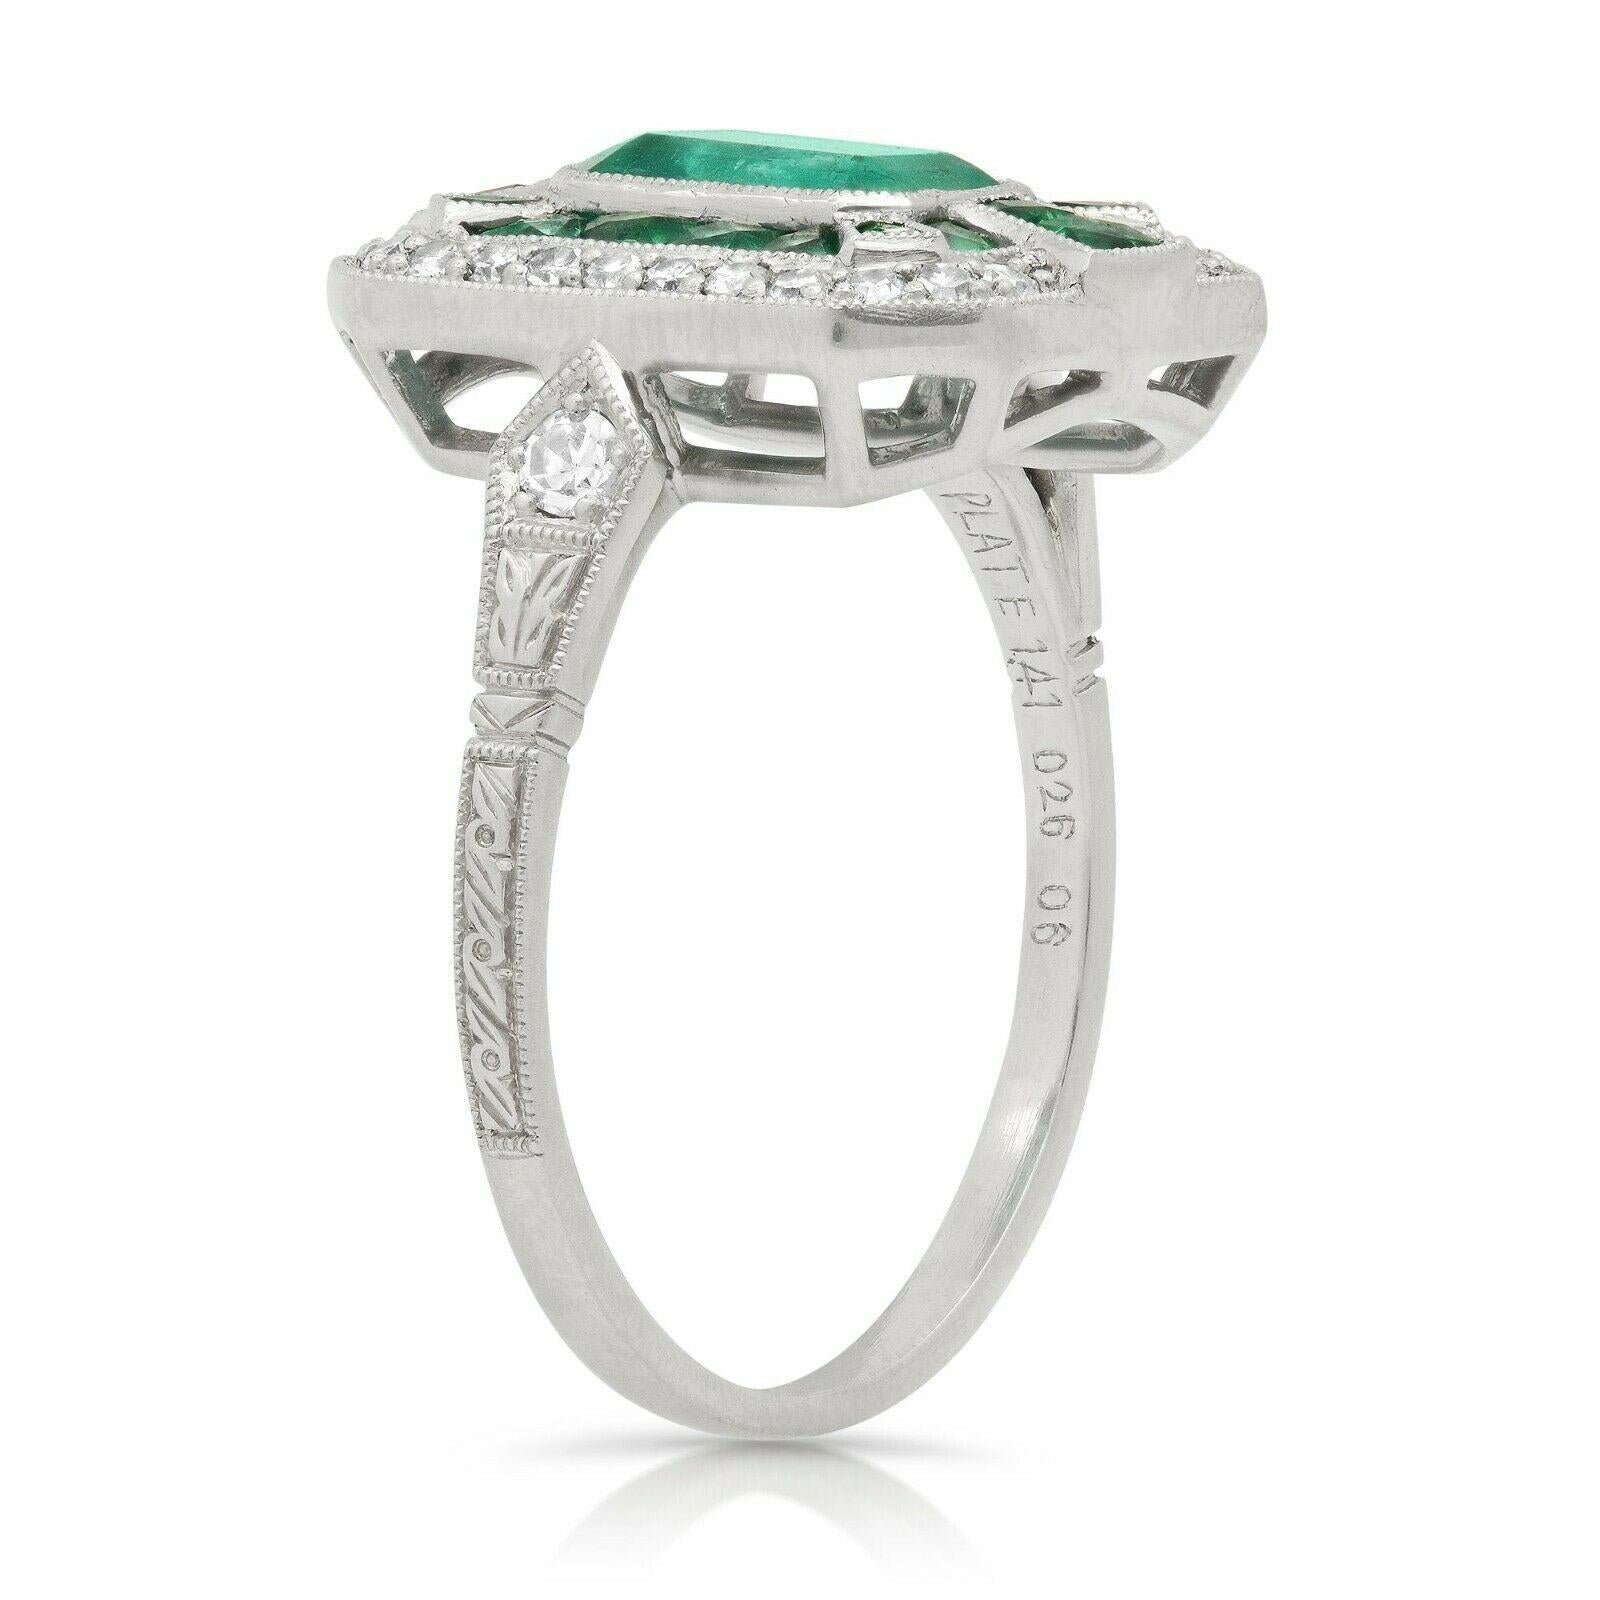 Emerald (2.01 total carat weight) and diamond (0.26 total carat weight) antique inspired cocktail ring in 900 platinum. The ring is designed and handmade locally in Los Angeles by Sage Designs L.A. using earth-mined and conflict free diamonds and